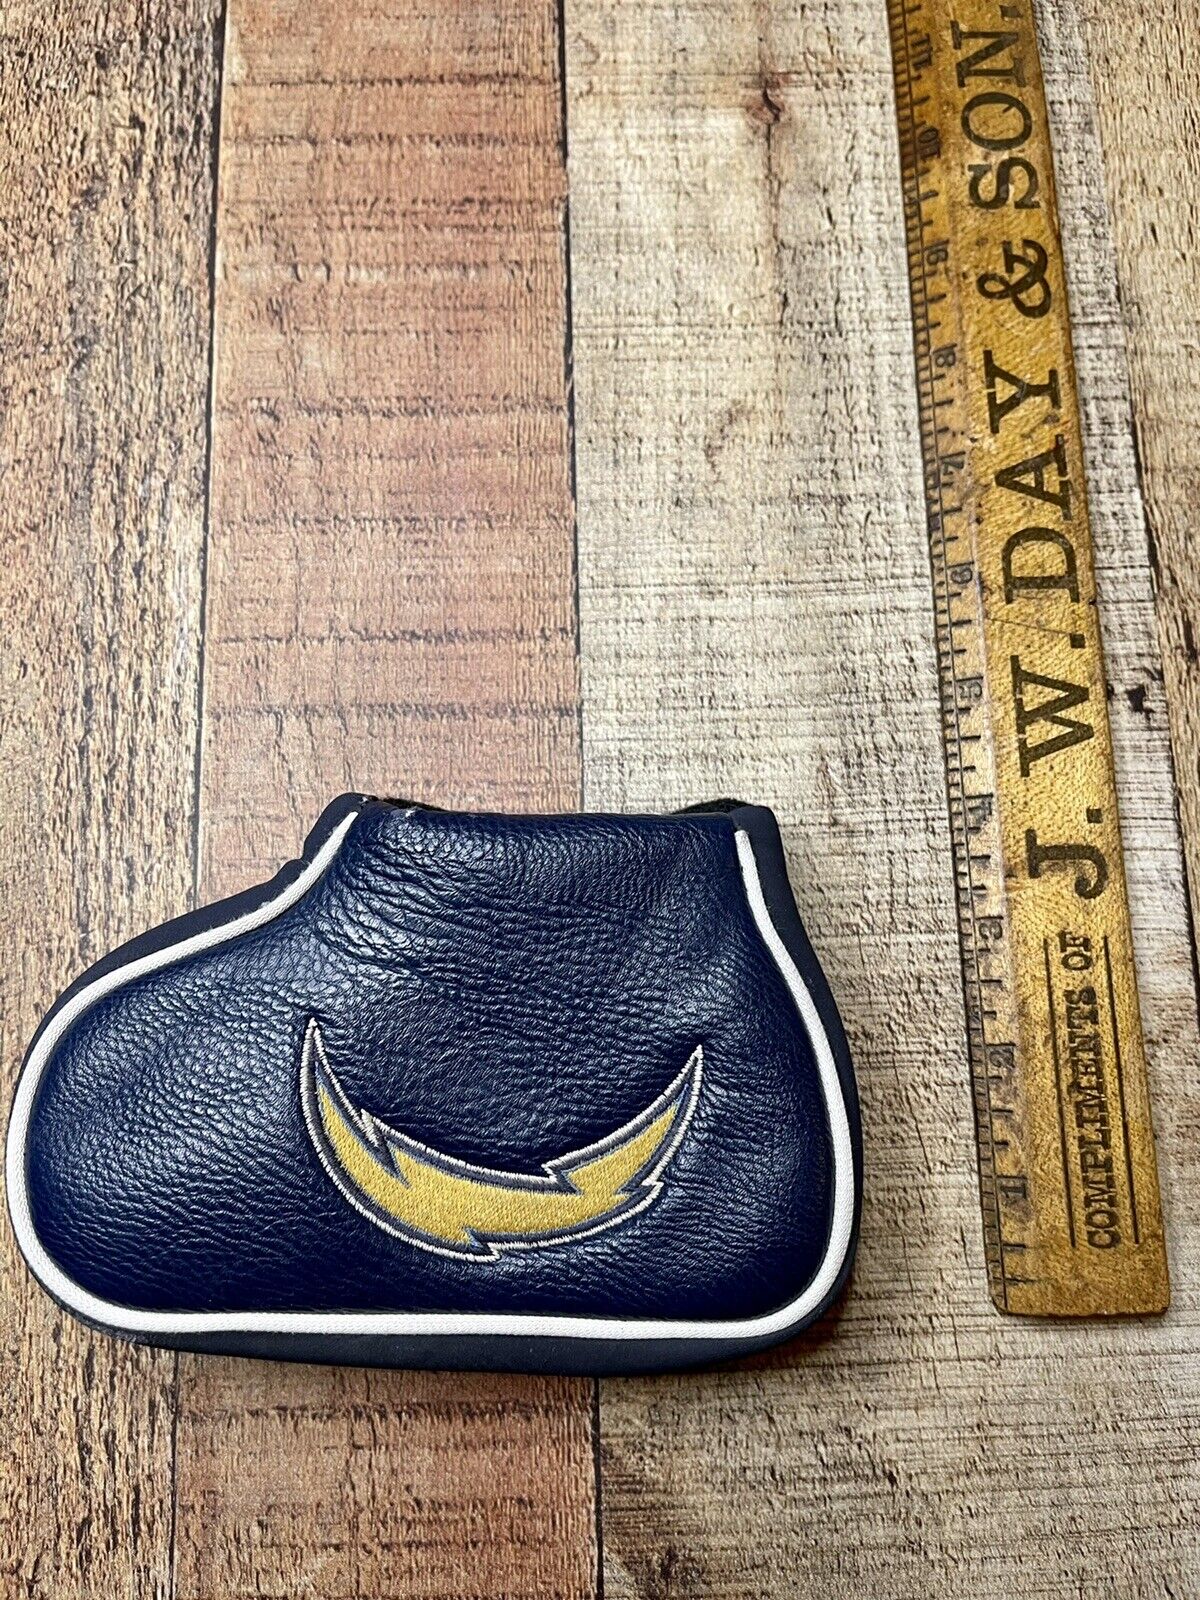 Chargers NFL Top load Blade putter Cover Used 